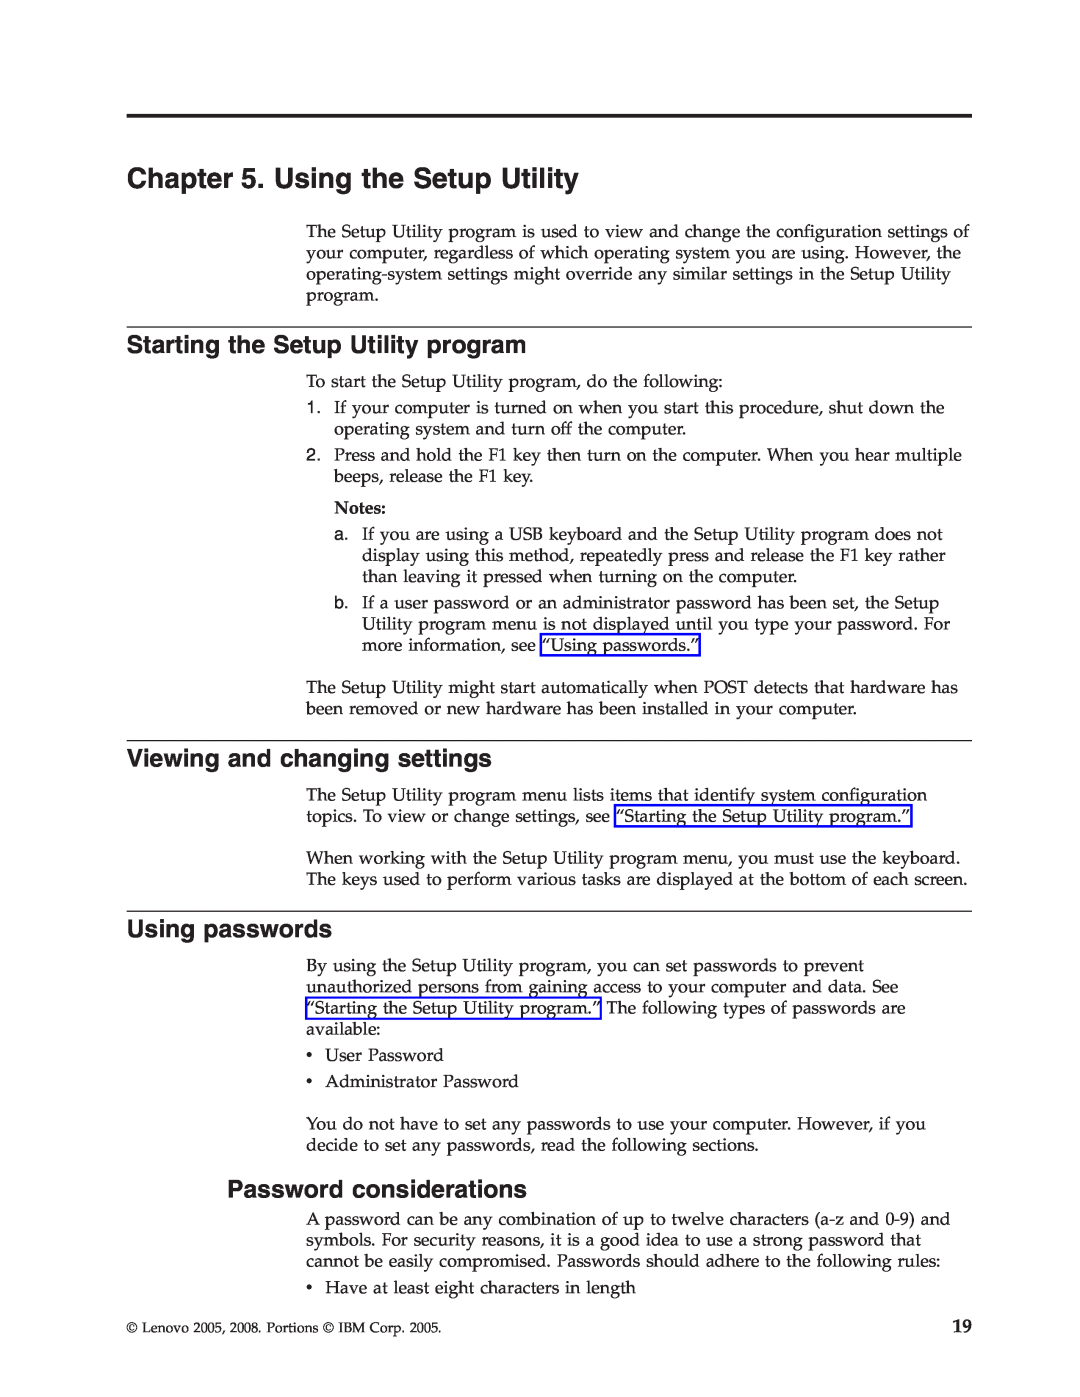 Lenovo 6439 Using the Setup Utility, Starting the Setup Utility program, Viewing and changing settings, Using passwords 